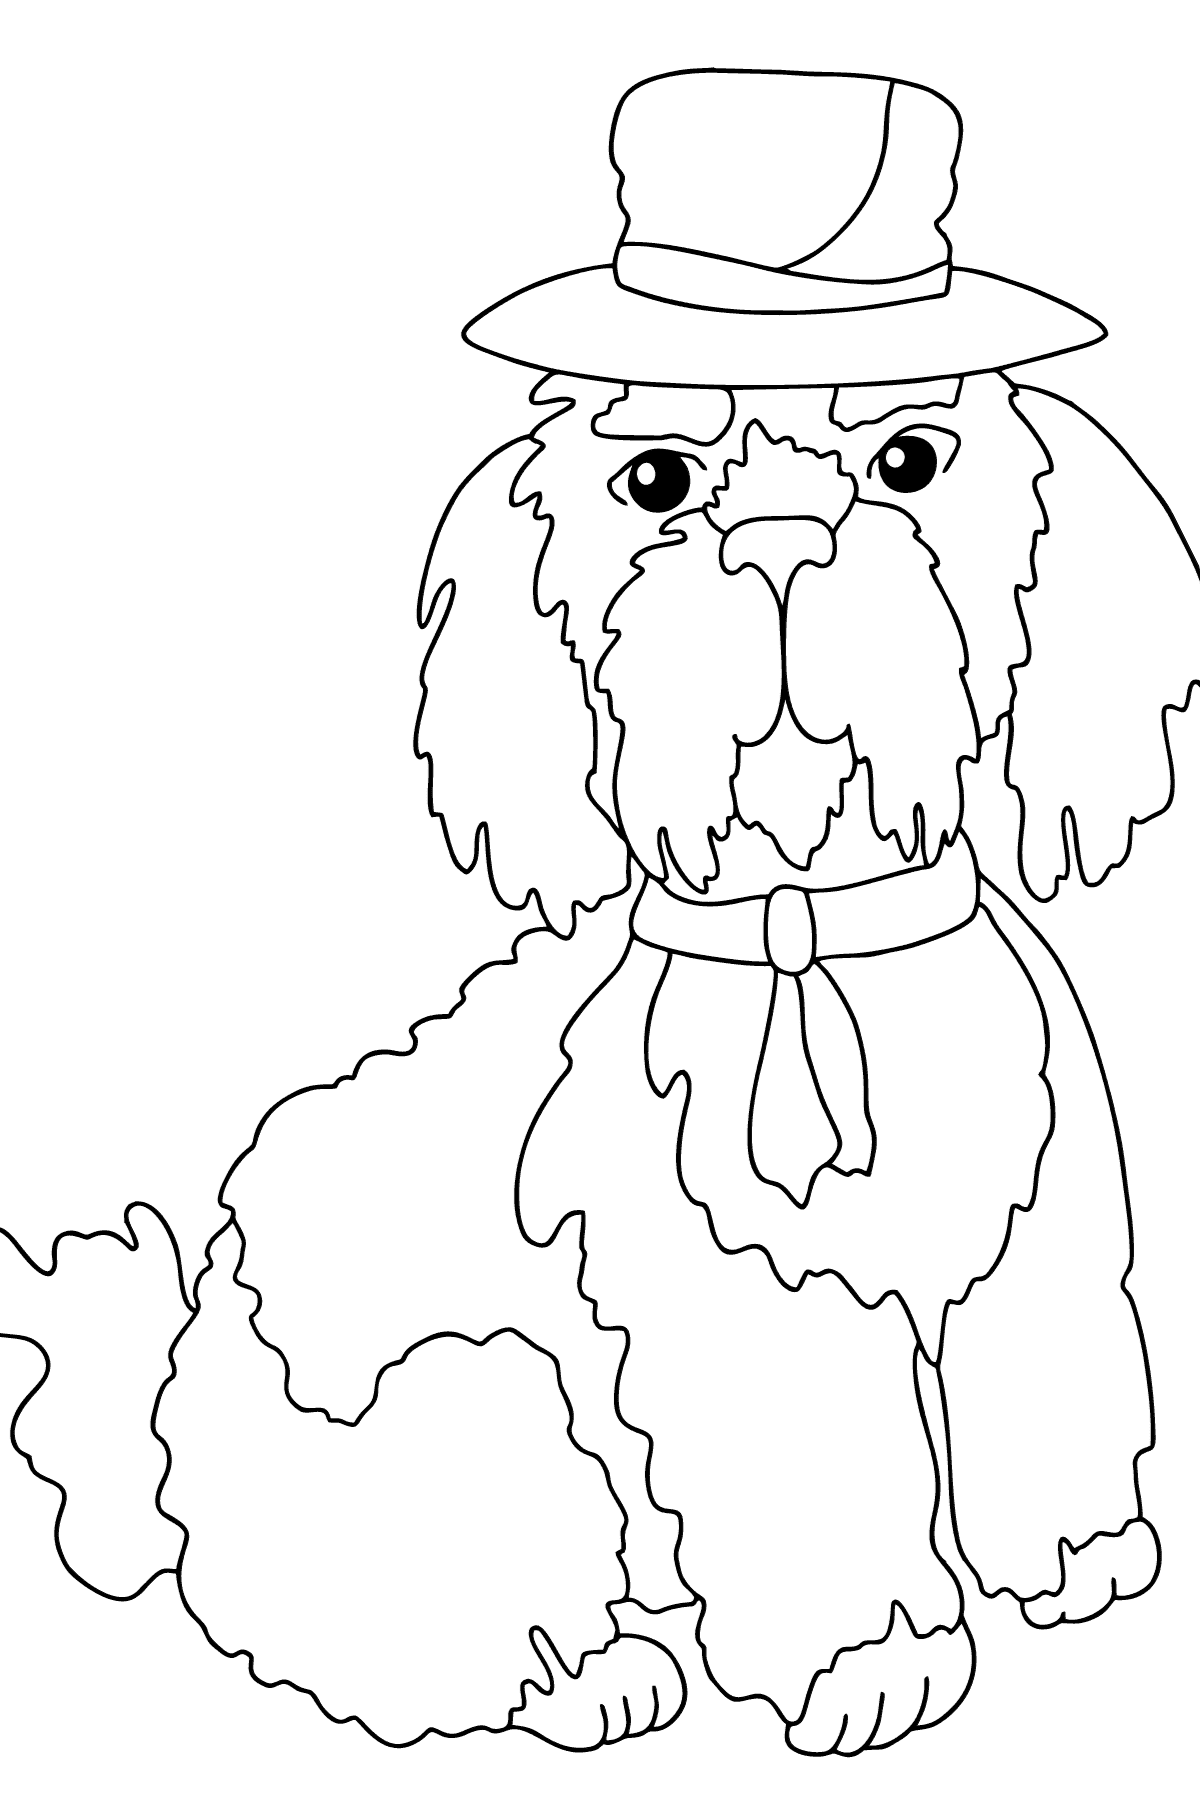 Coloring Page - A Dog in a Fancy Hat for Children 